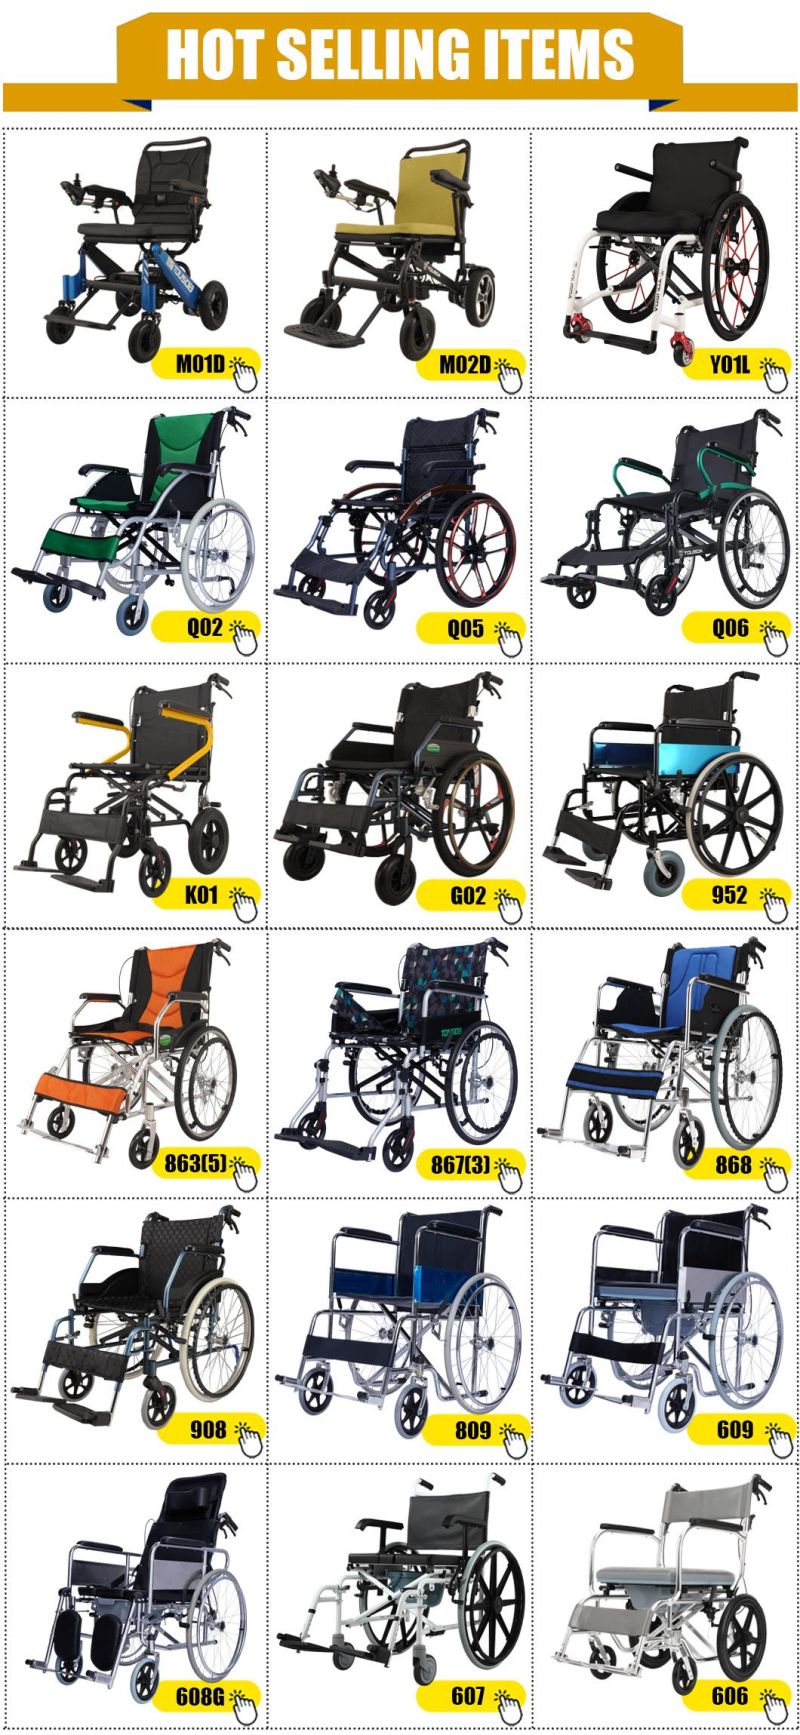 Automatic Folding Handicapped Wheelchair Electric with 24V Battery for Disabled People